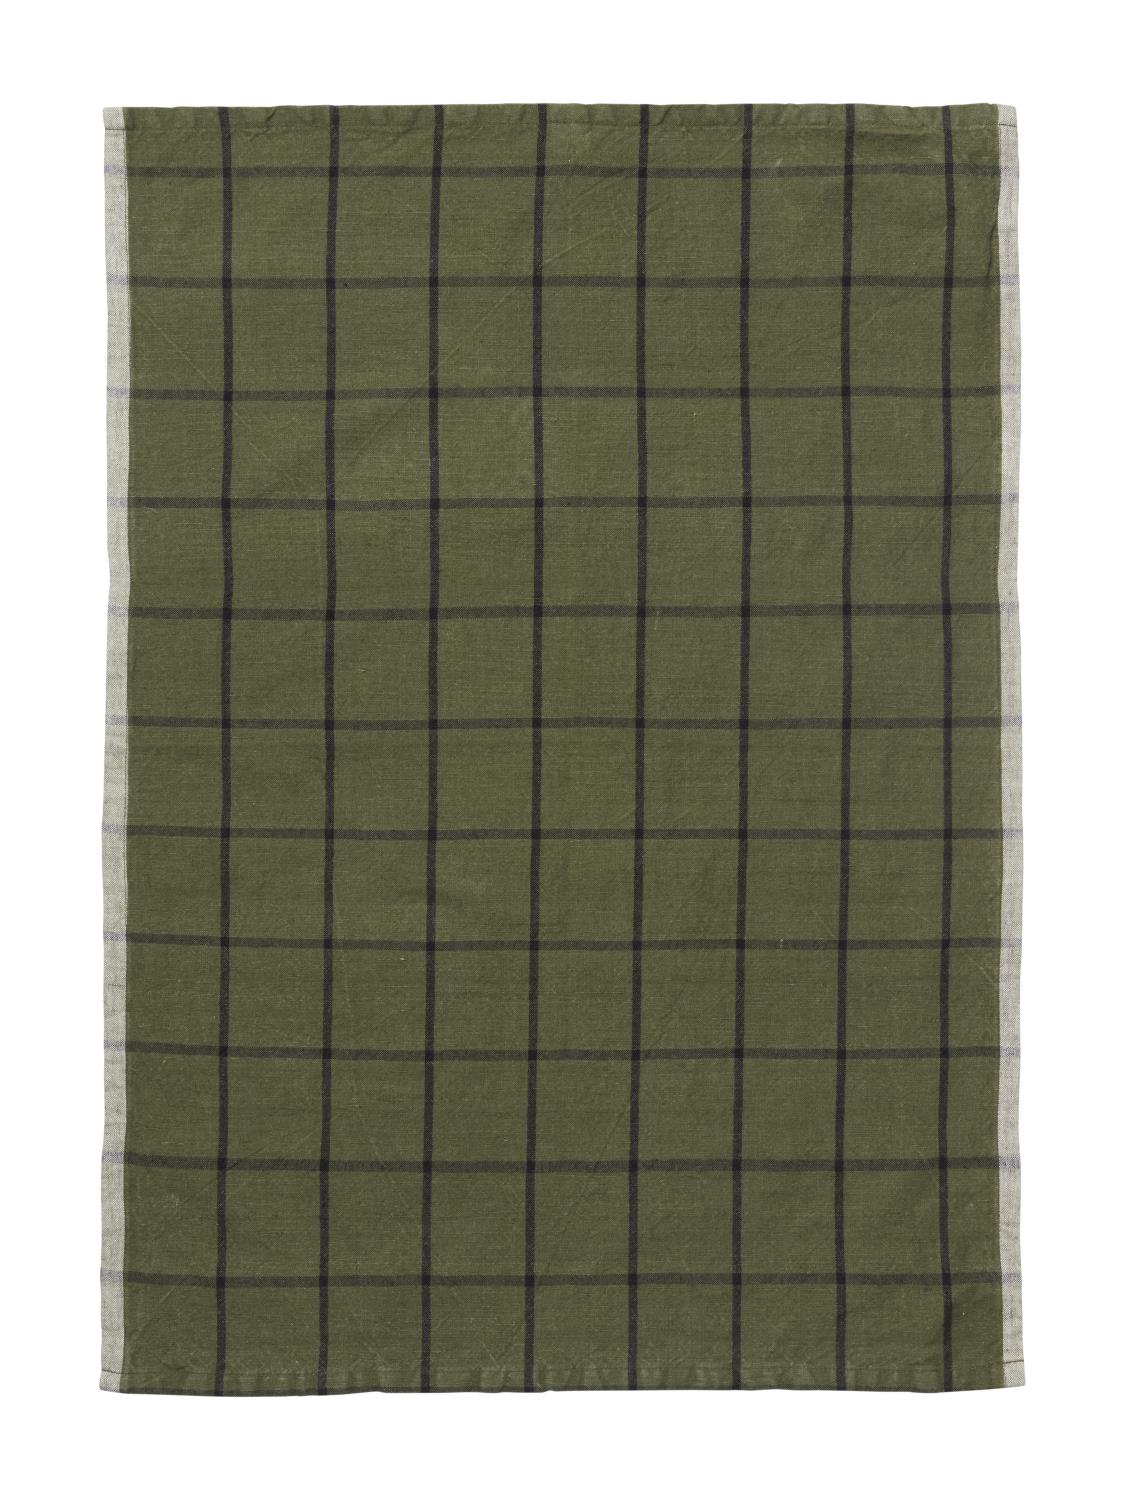 Ferm Living - Hale Yarn-Dyed Tea Towels - Green and Black